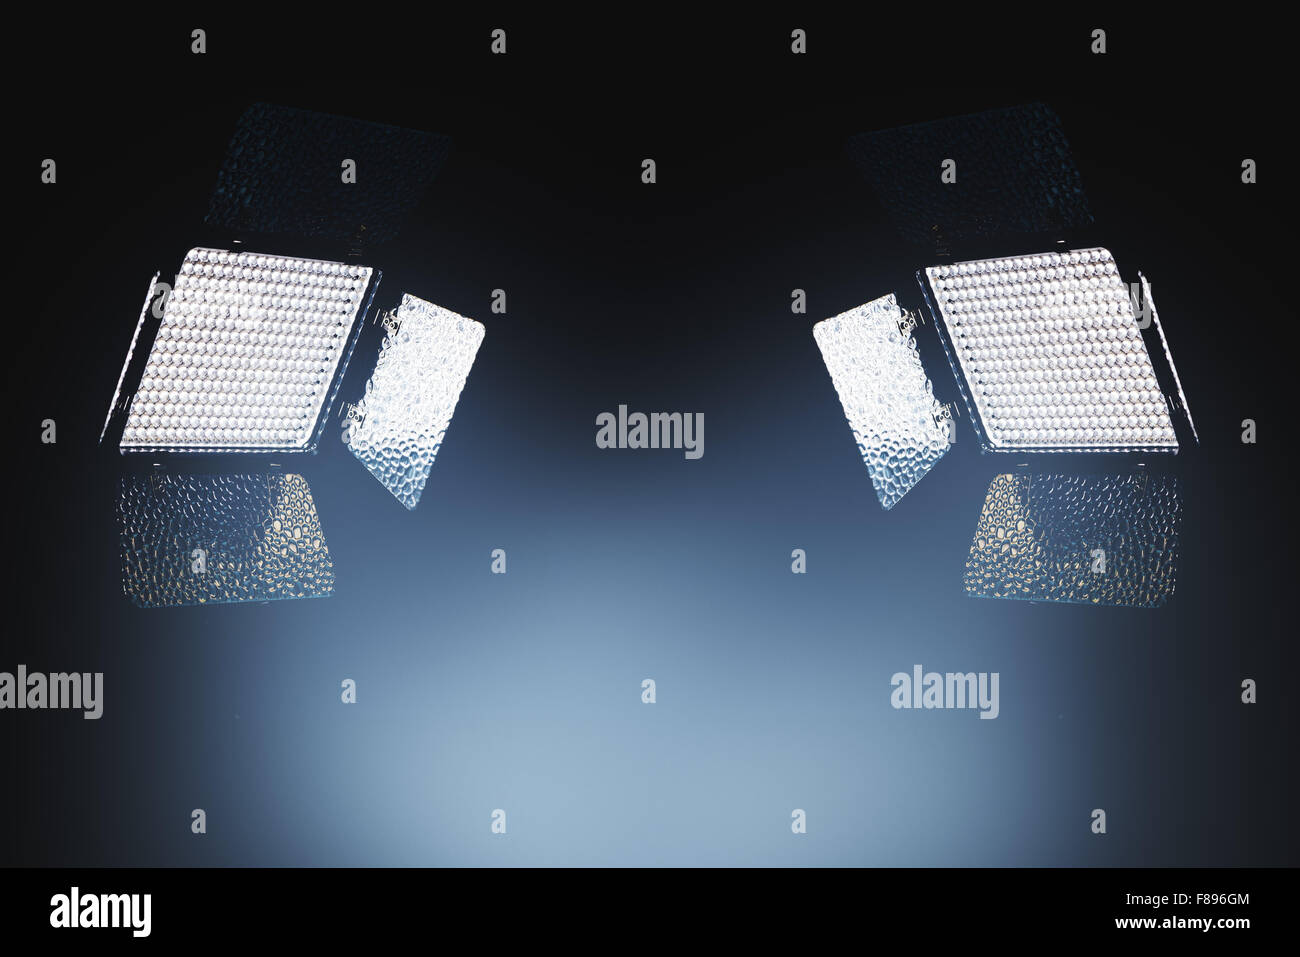 Professional LED lighting equipment for photo and video production in dark studio interior Stock Photo